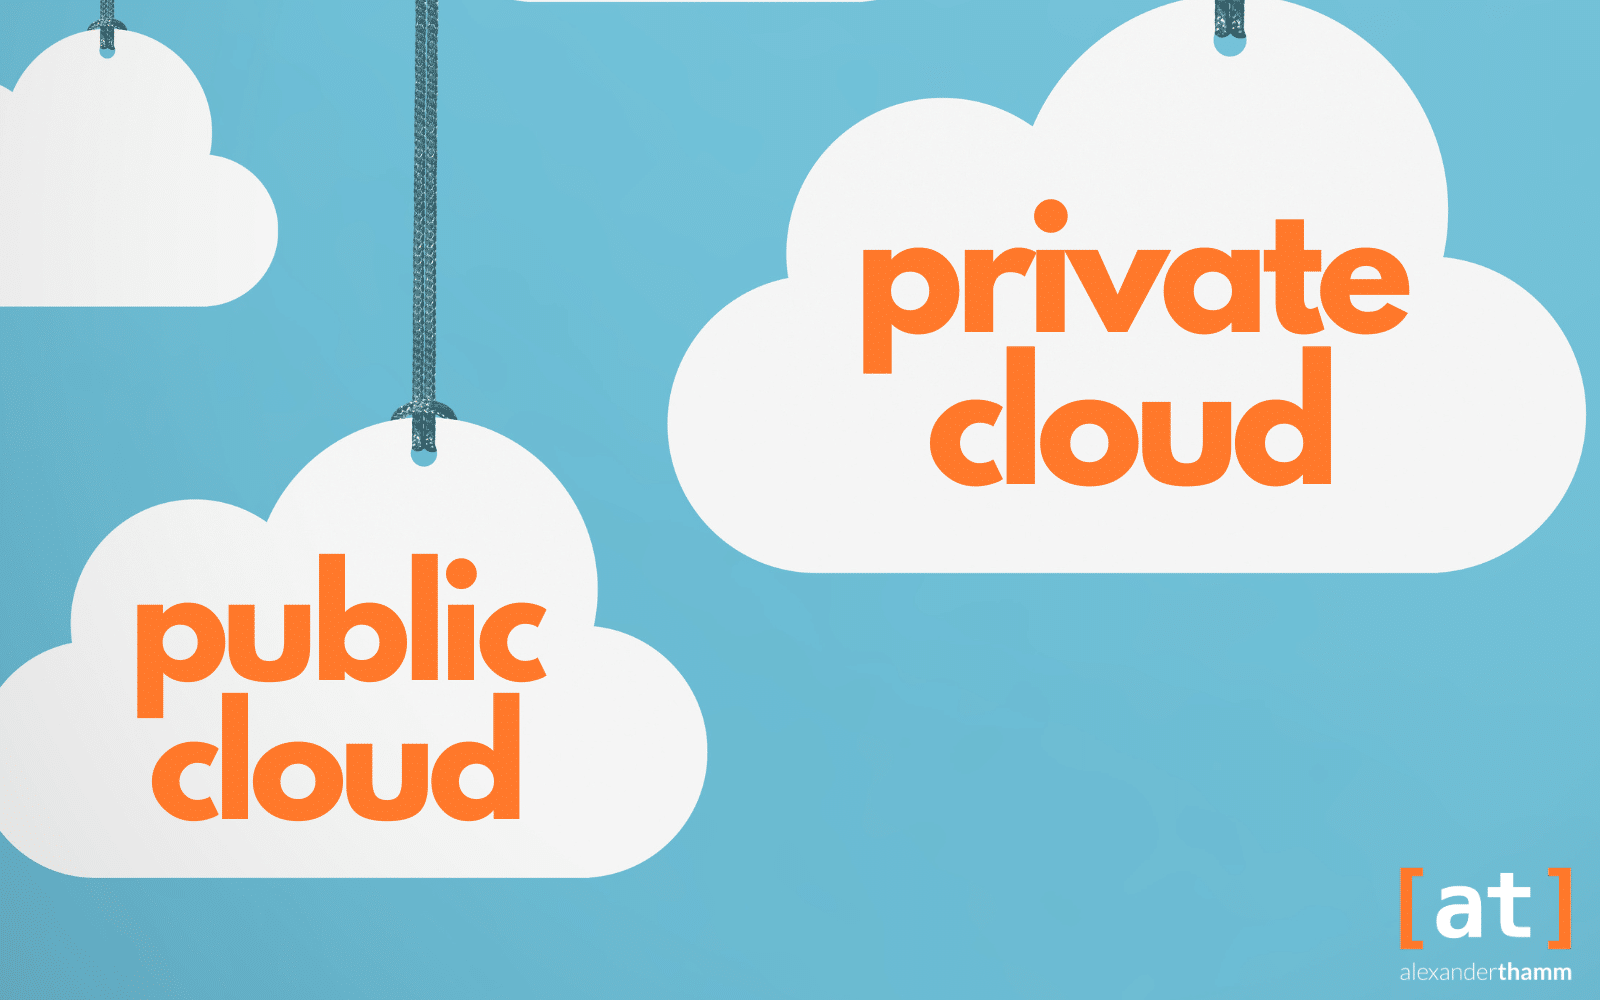 Public vs. private cloud - advantages, disadvantages, differences and use cases for companies